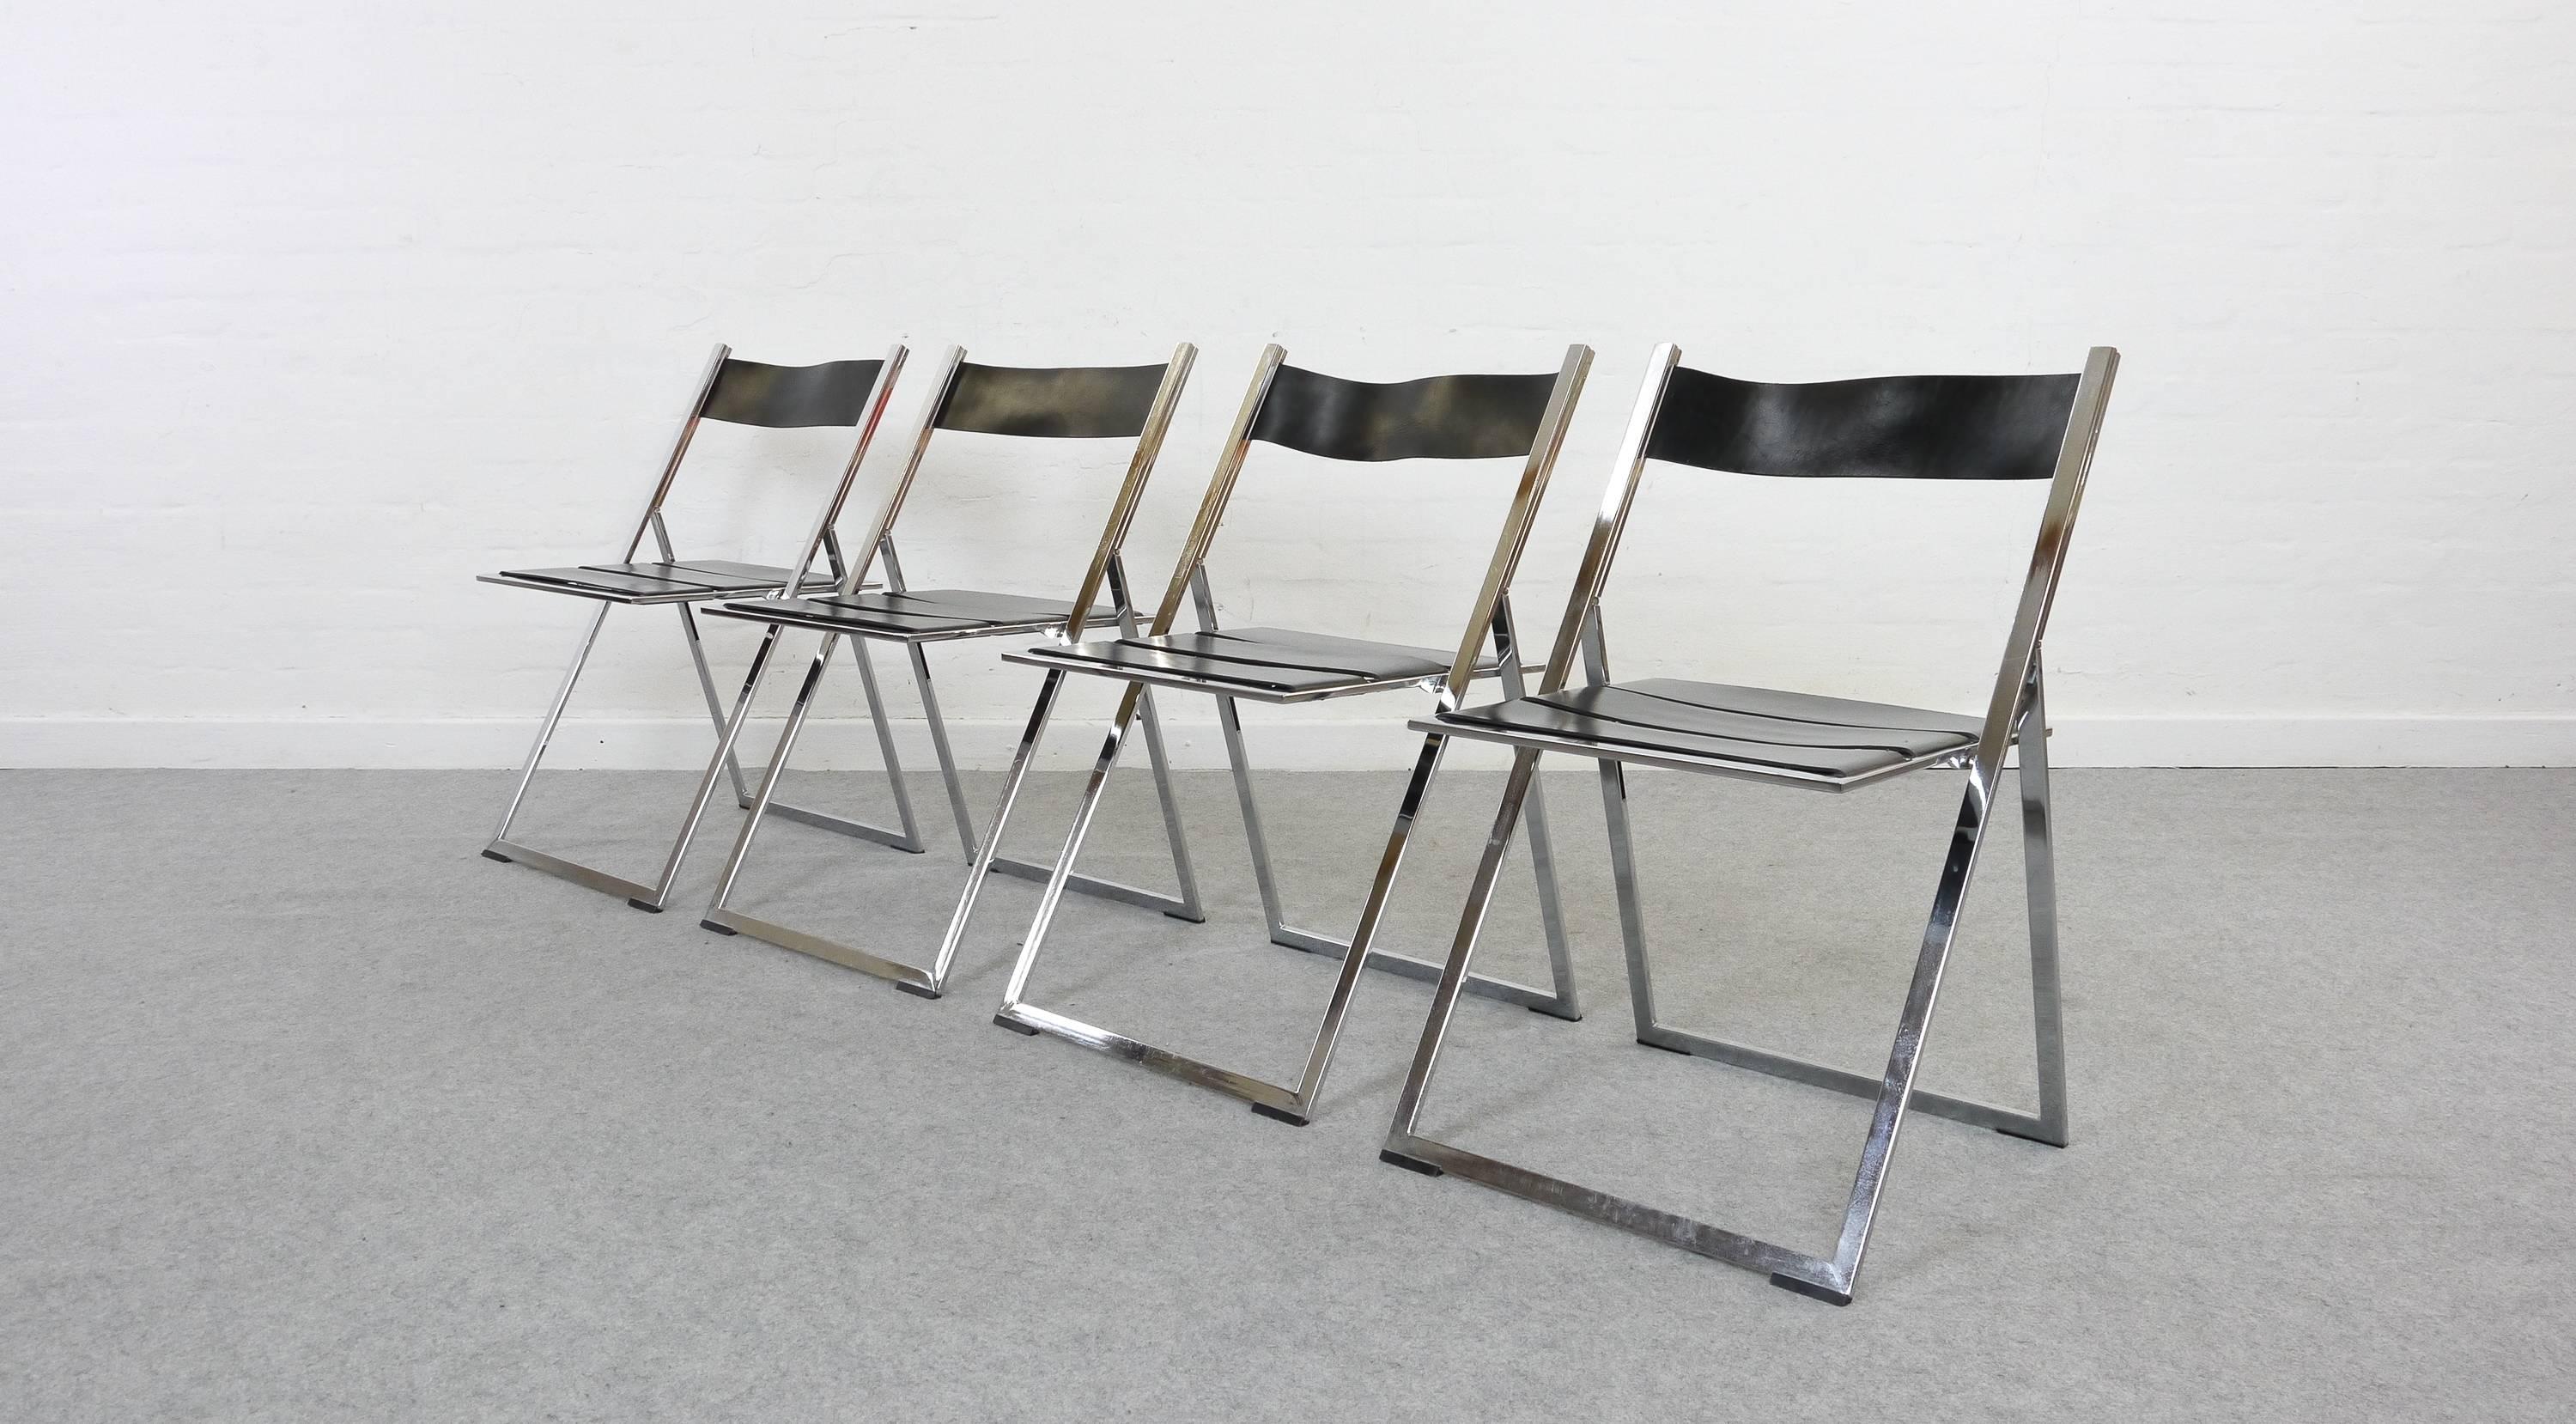 Set of four chromed steel and black leather dining chairs/folding chairs. Probably the most stylish folding-chair ever produced. When folded, the chairs have only 2 cm in depth. Accurate to store away! Designed by Lübke/Interlübke, Germany, circa